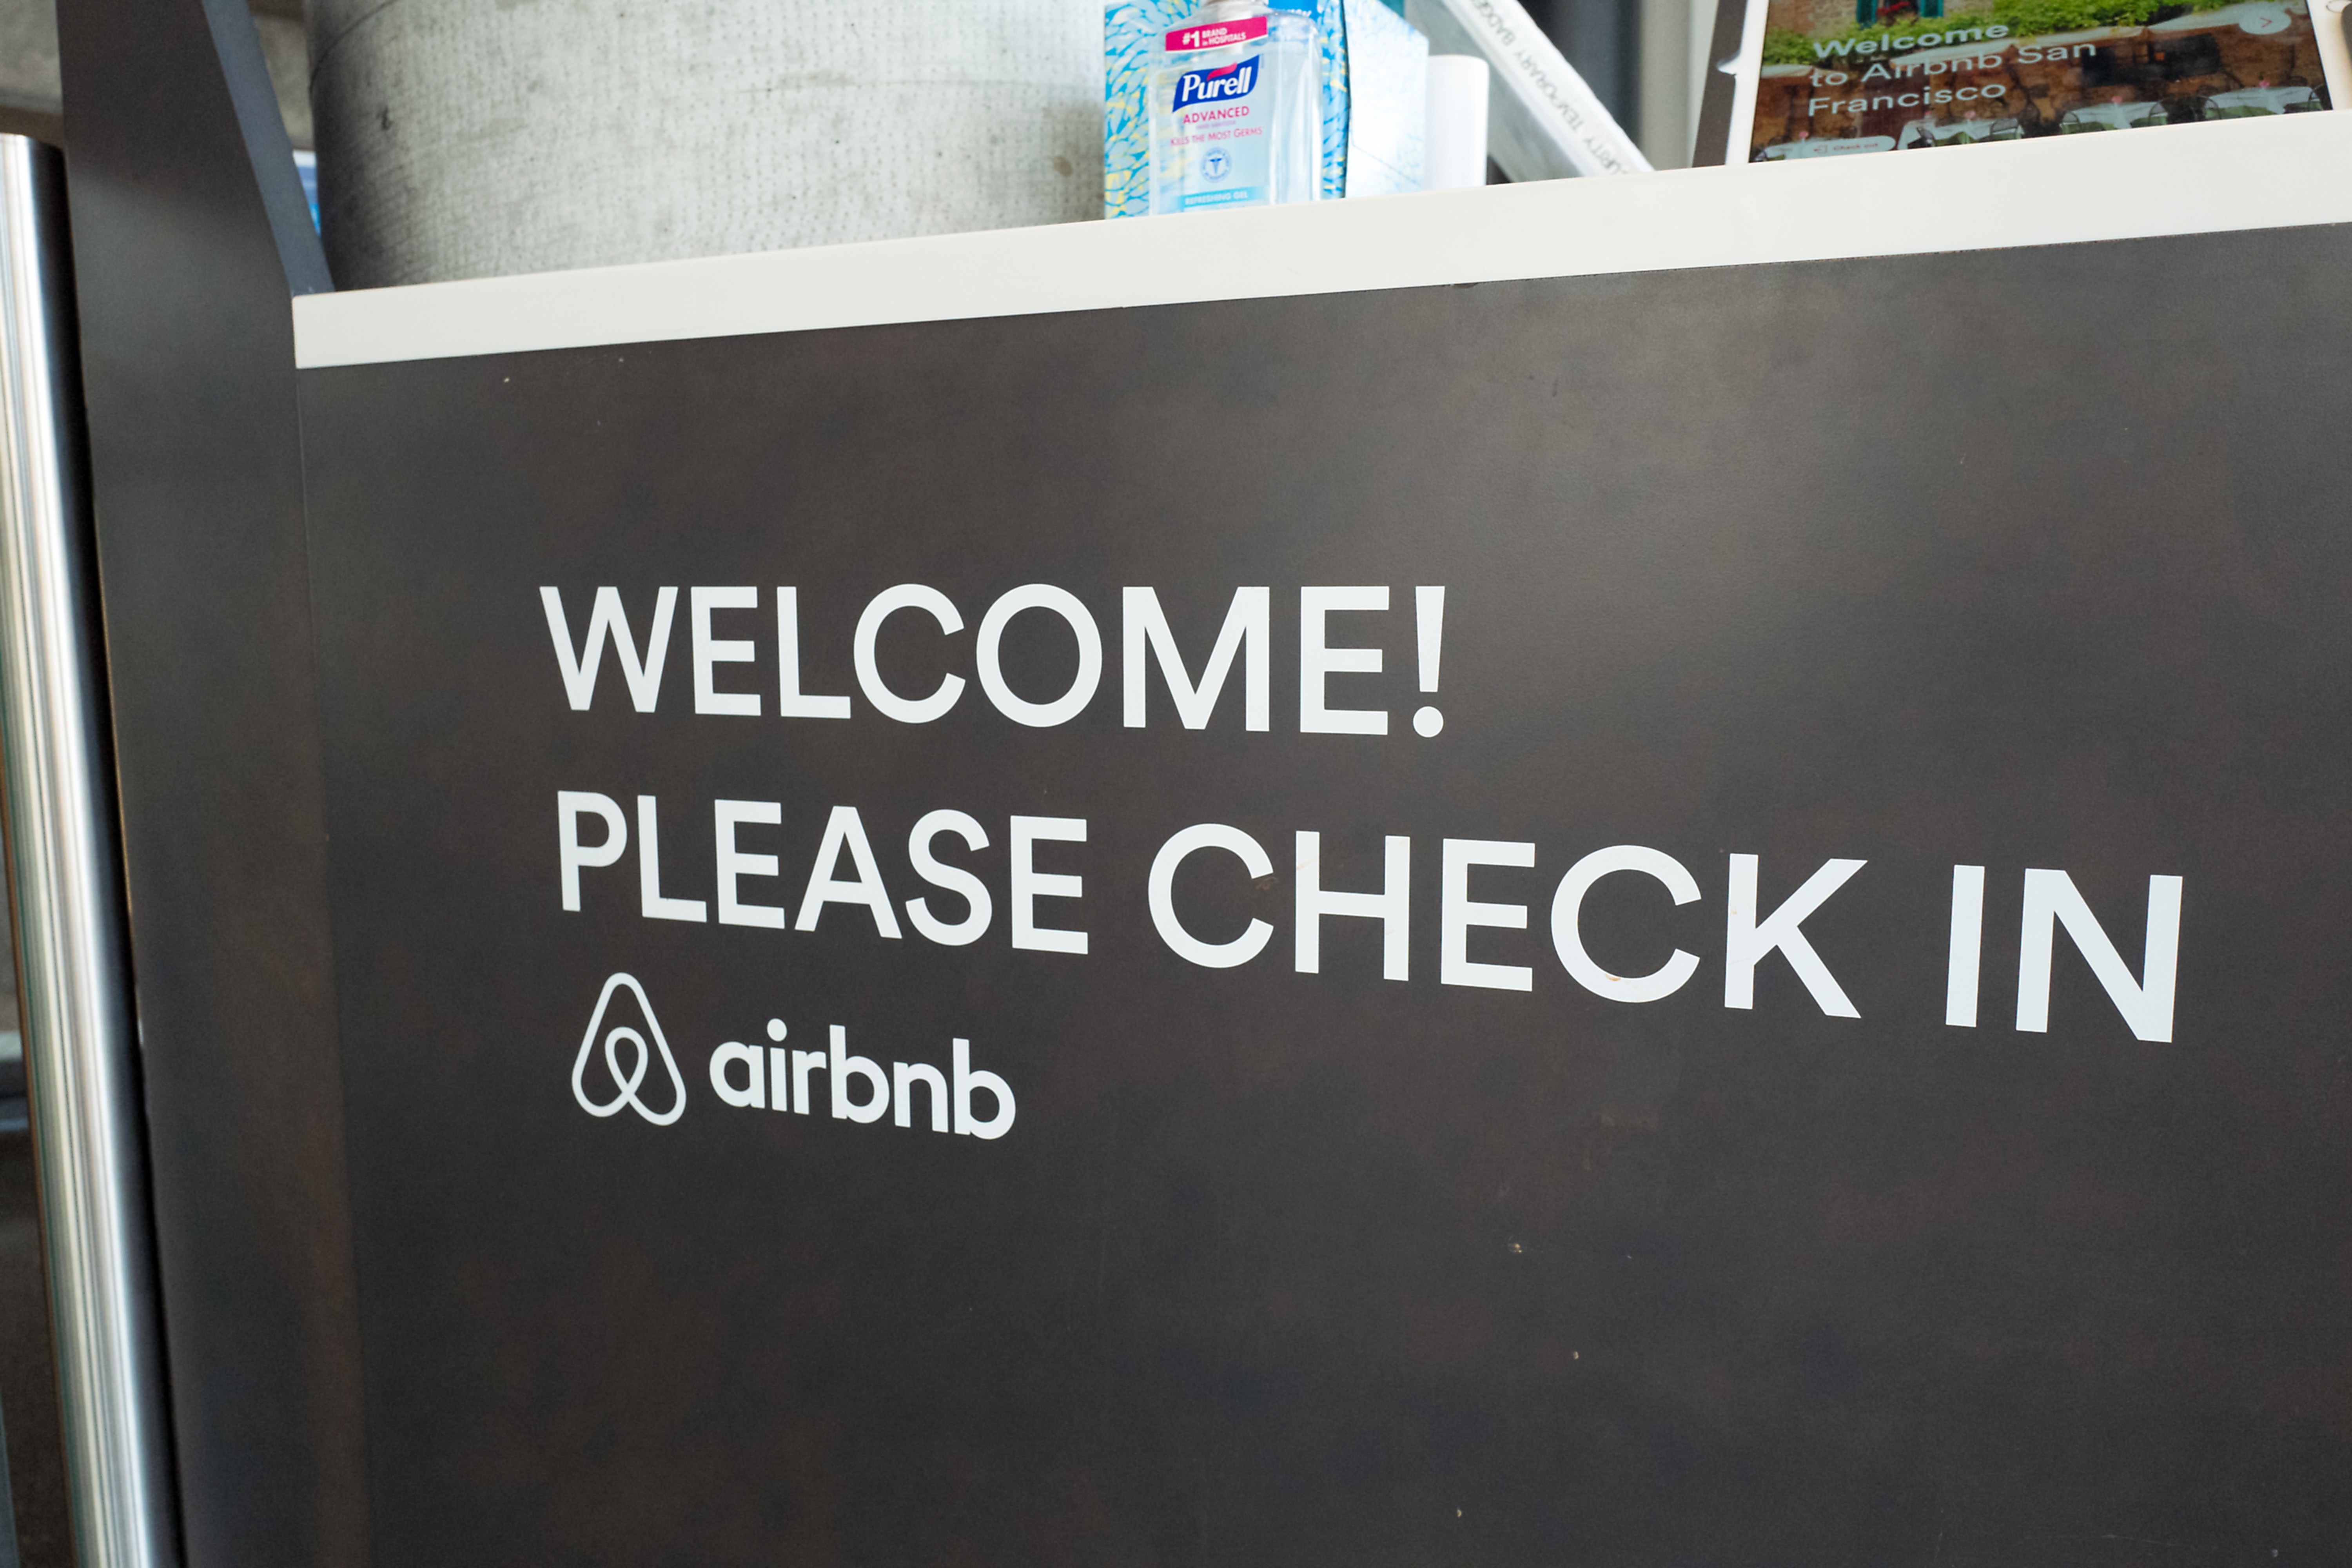 Airbnb nears IPO as Asana and Palantir land their direct listings